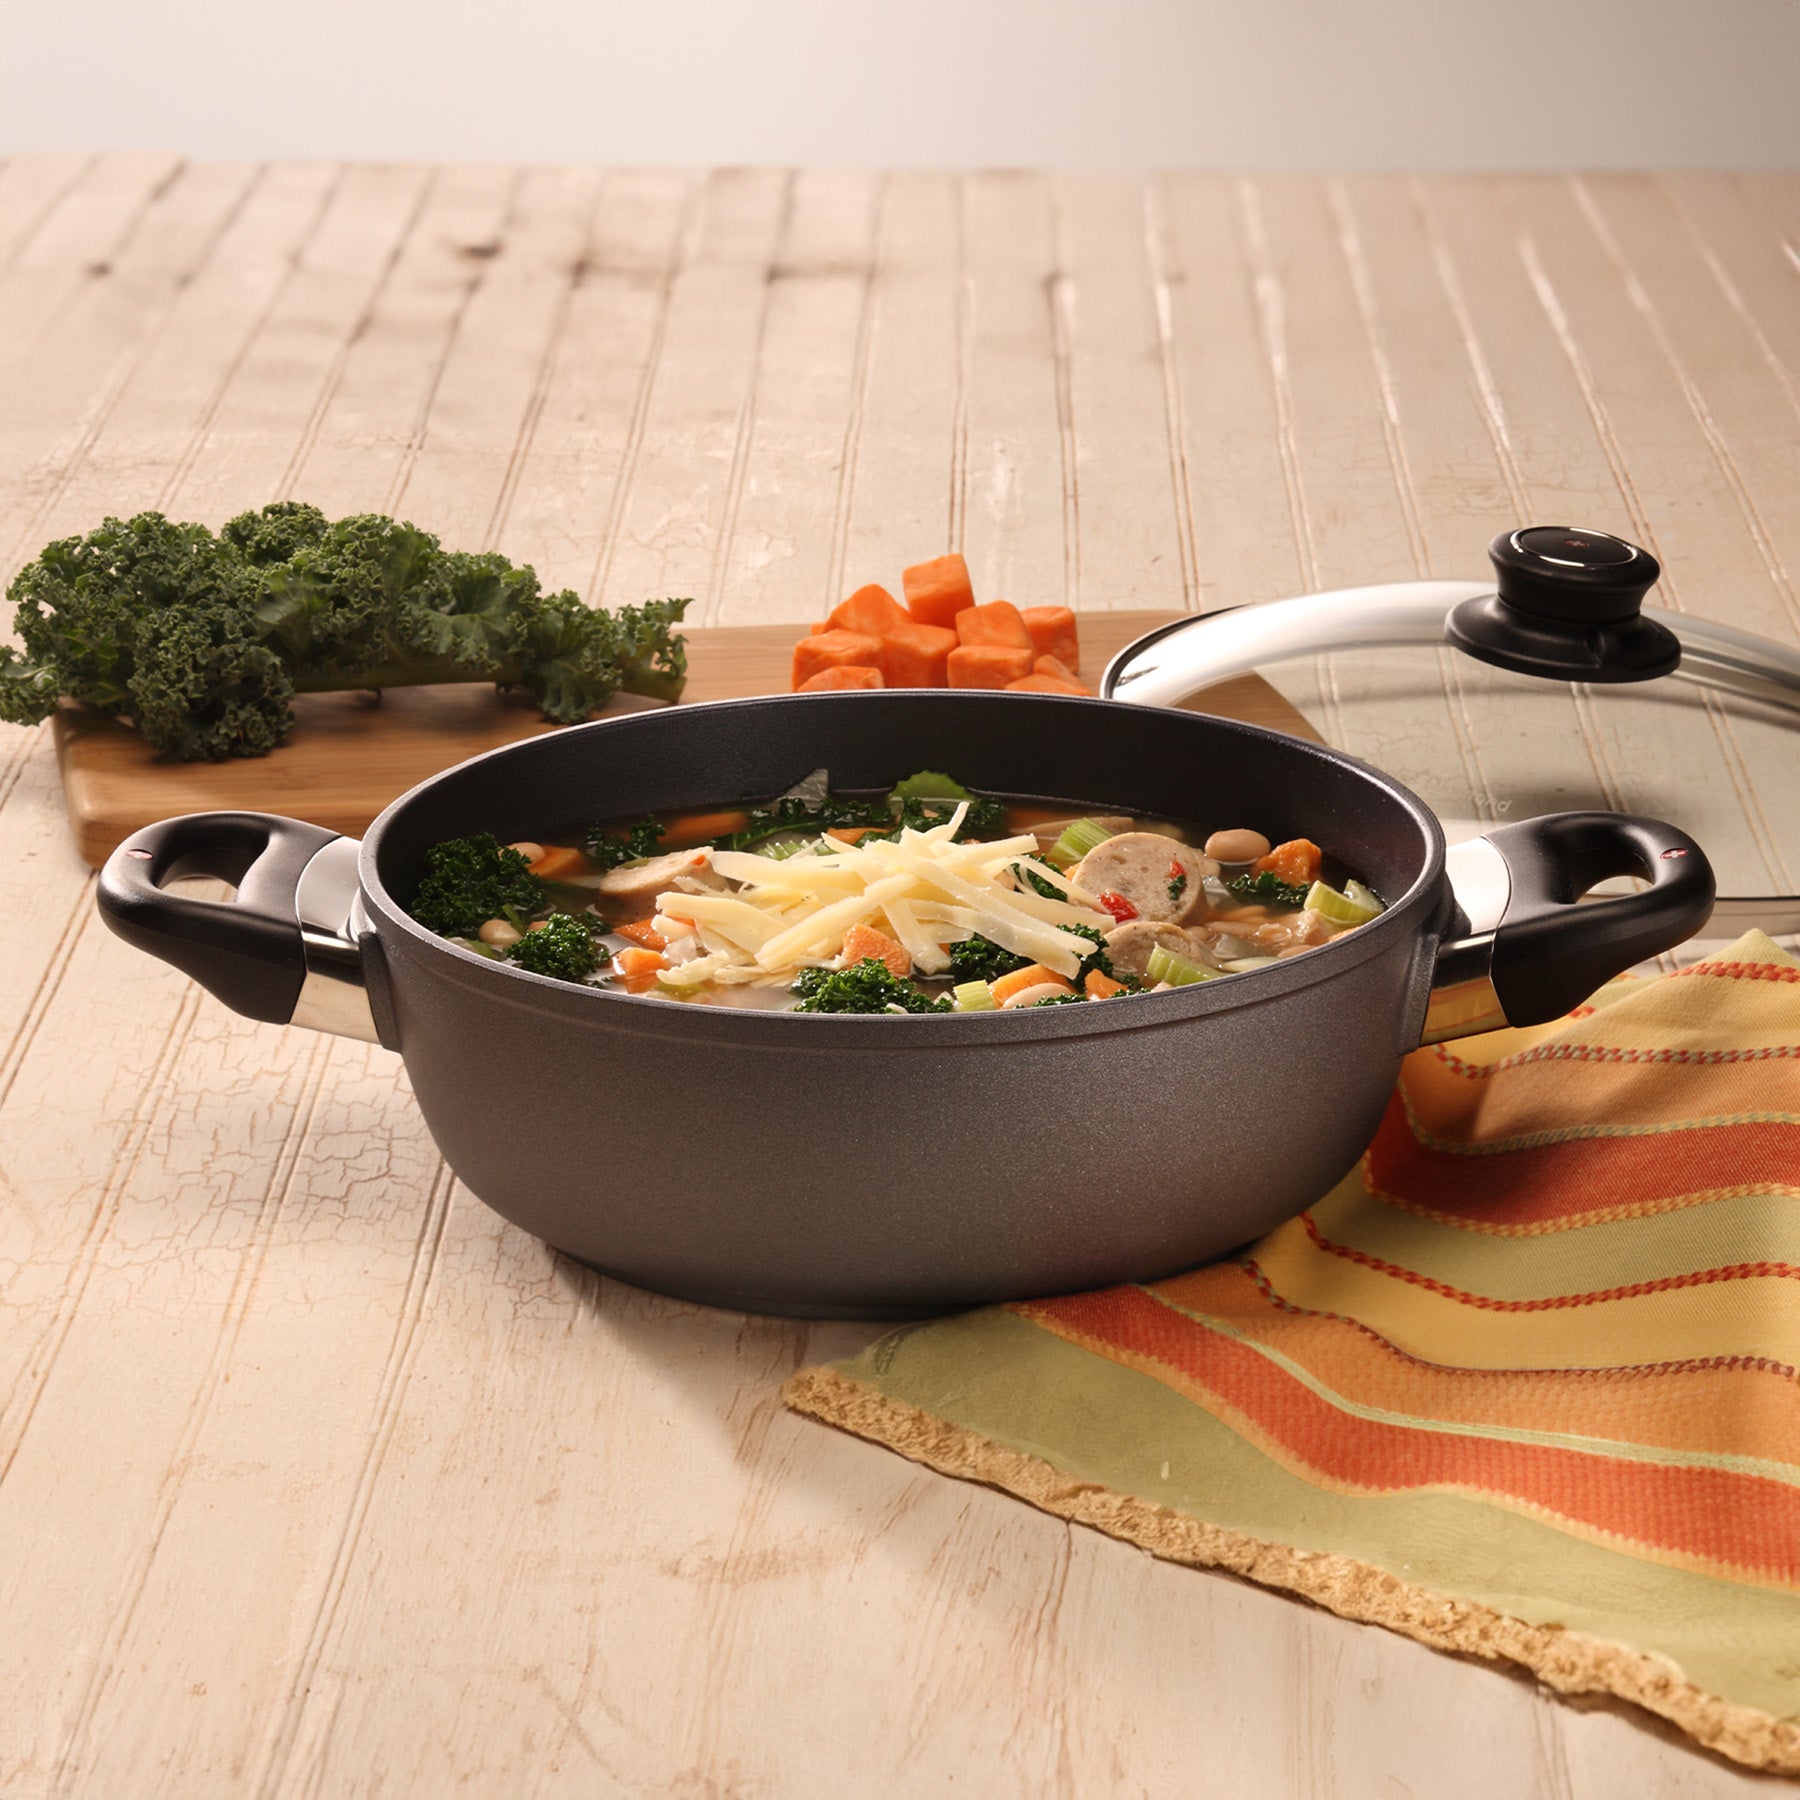 HD Nonstick Casserole with Glass Lid in use on wooden table